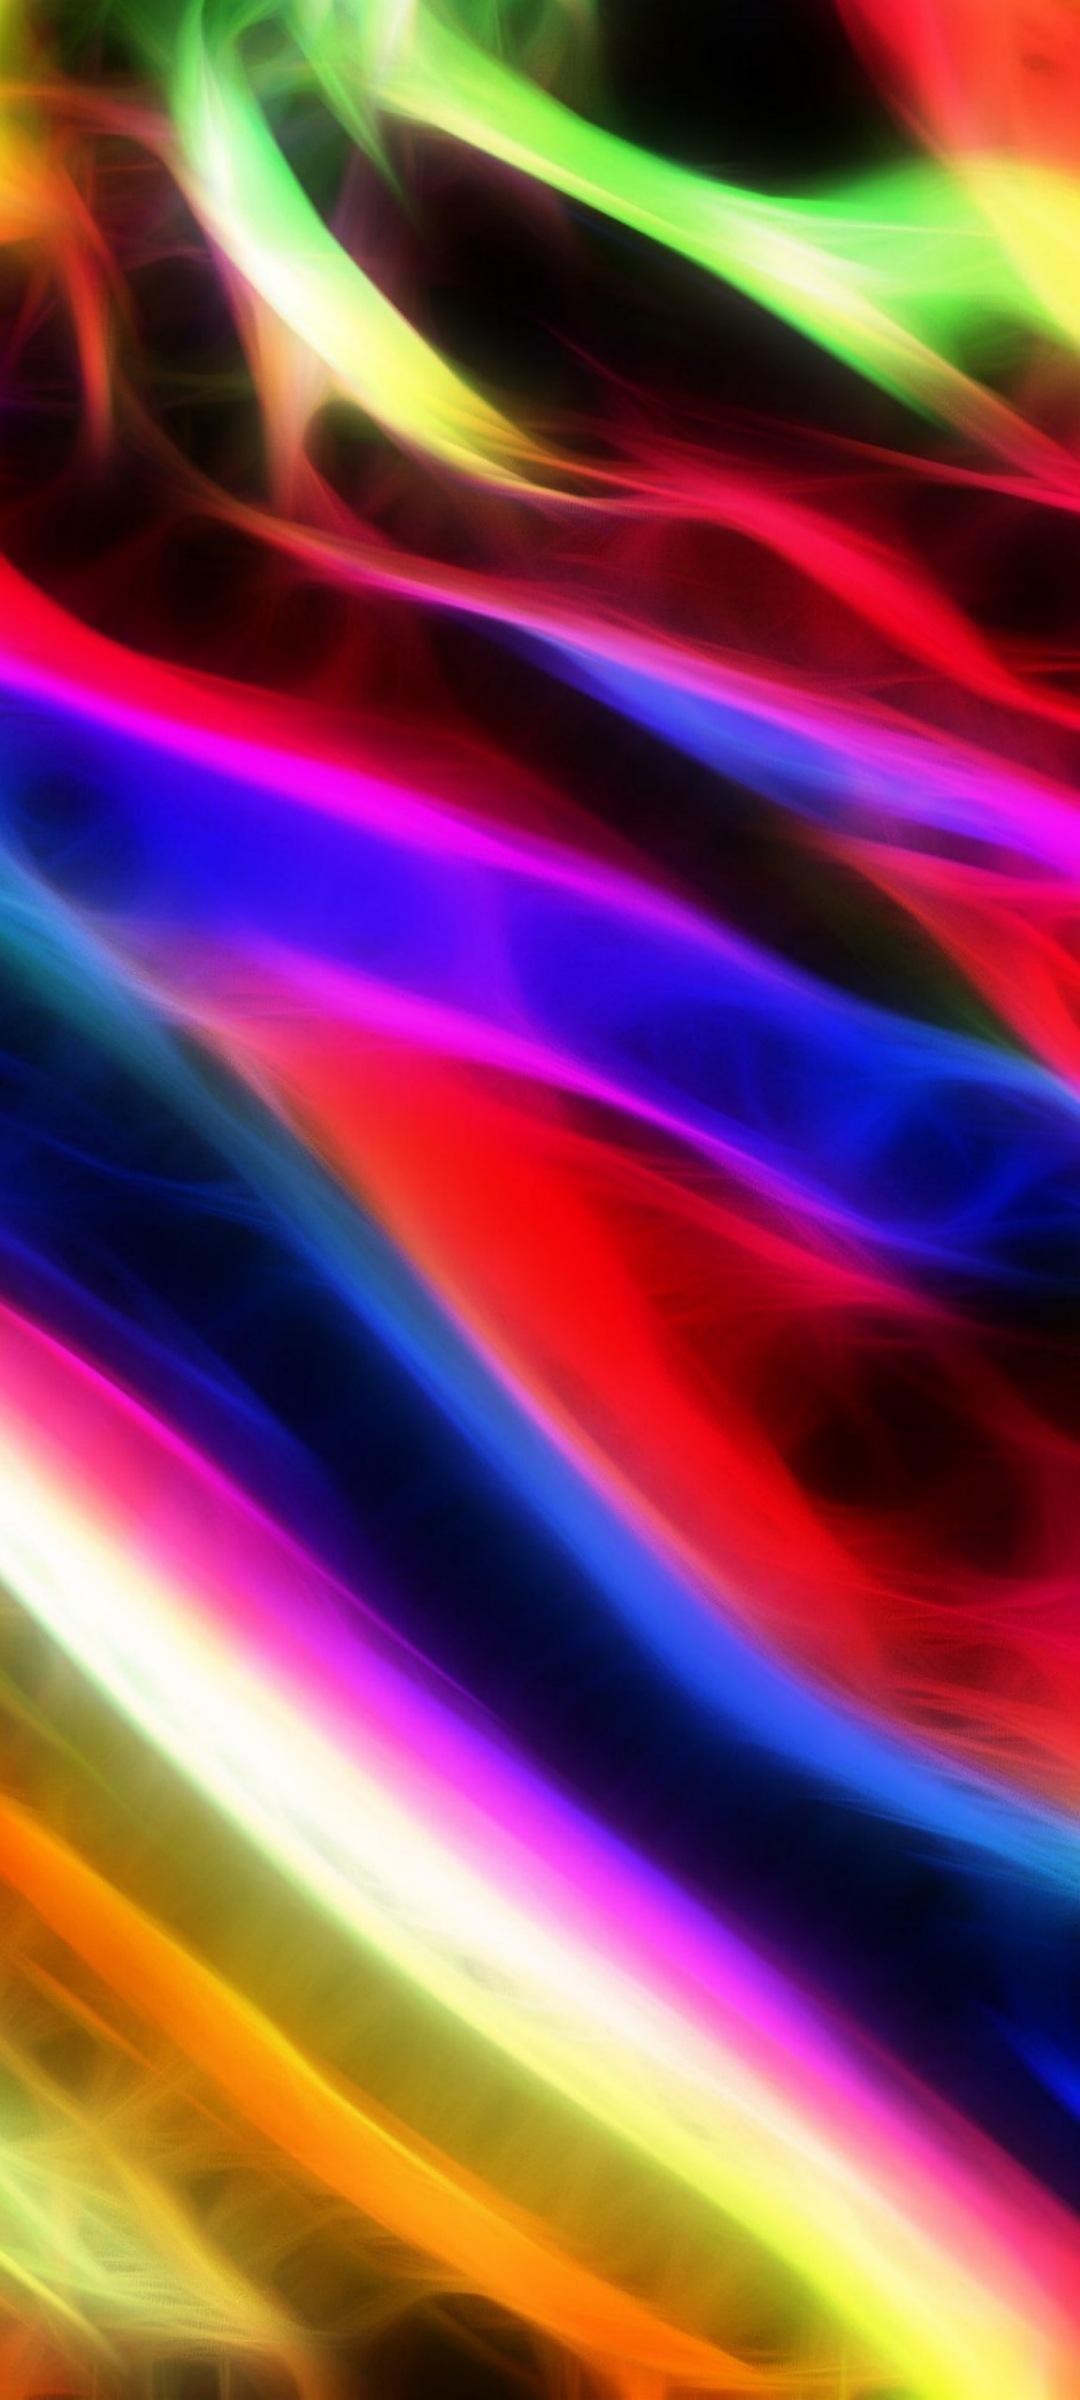 1080x2400 Backgrounds abstract. 1080x2400